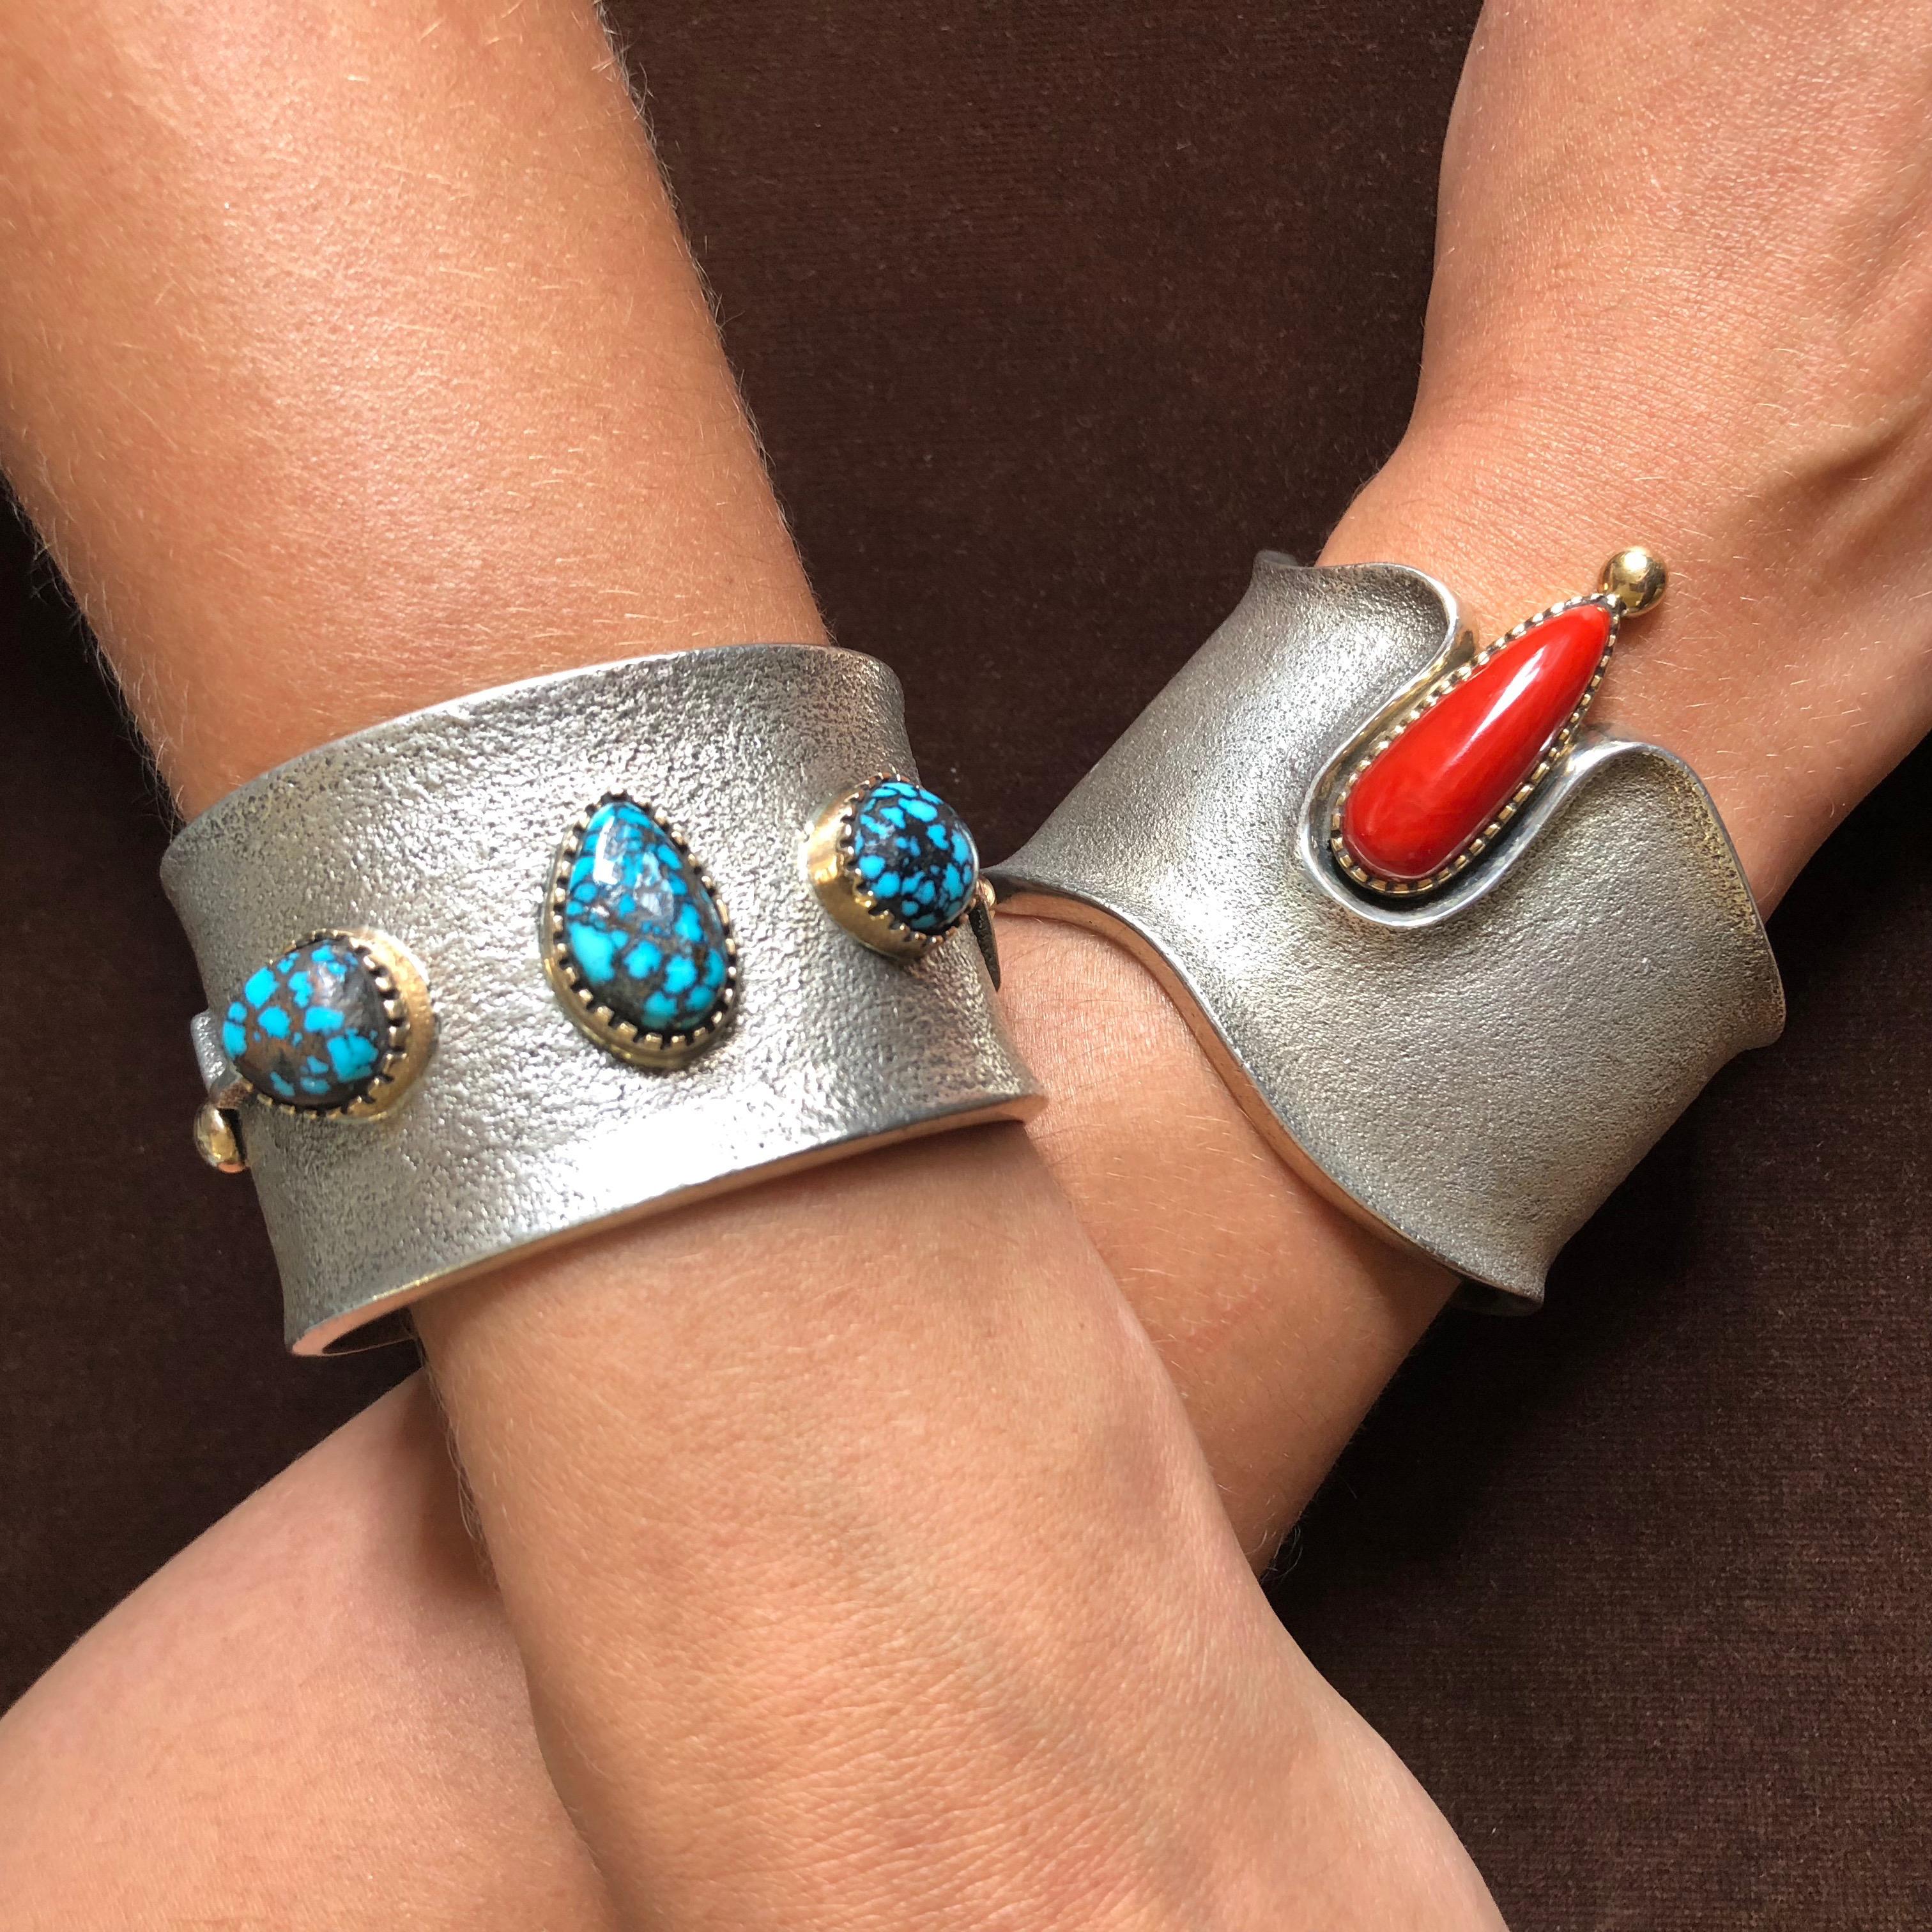 This is a unique coral, 14 karat gold and tufa cast sterling silver cuff by Navajo artist Edison Cummings, 2015. The inside of the cuff measures 5.50